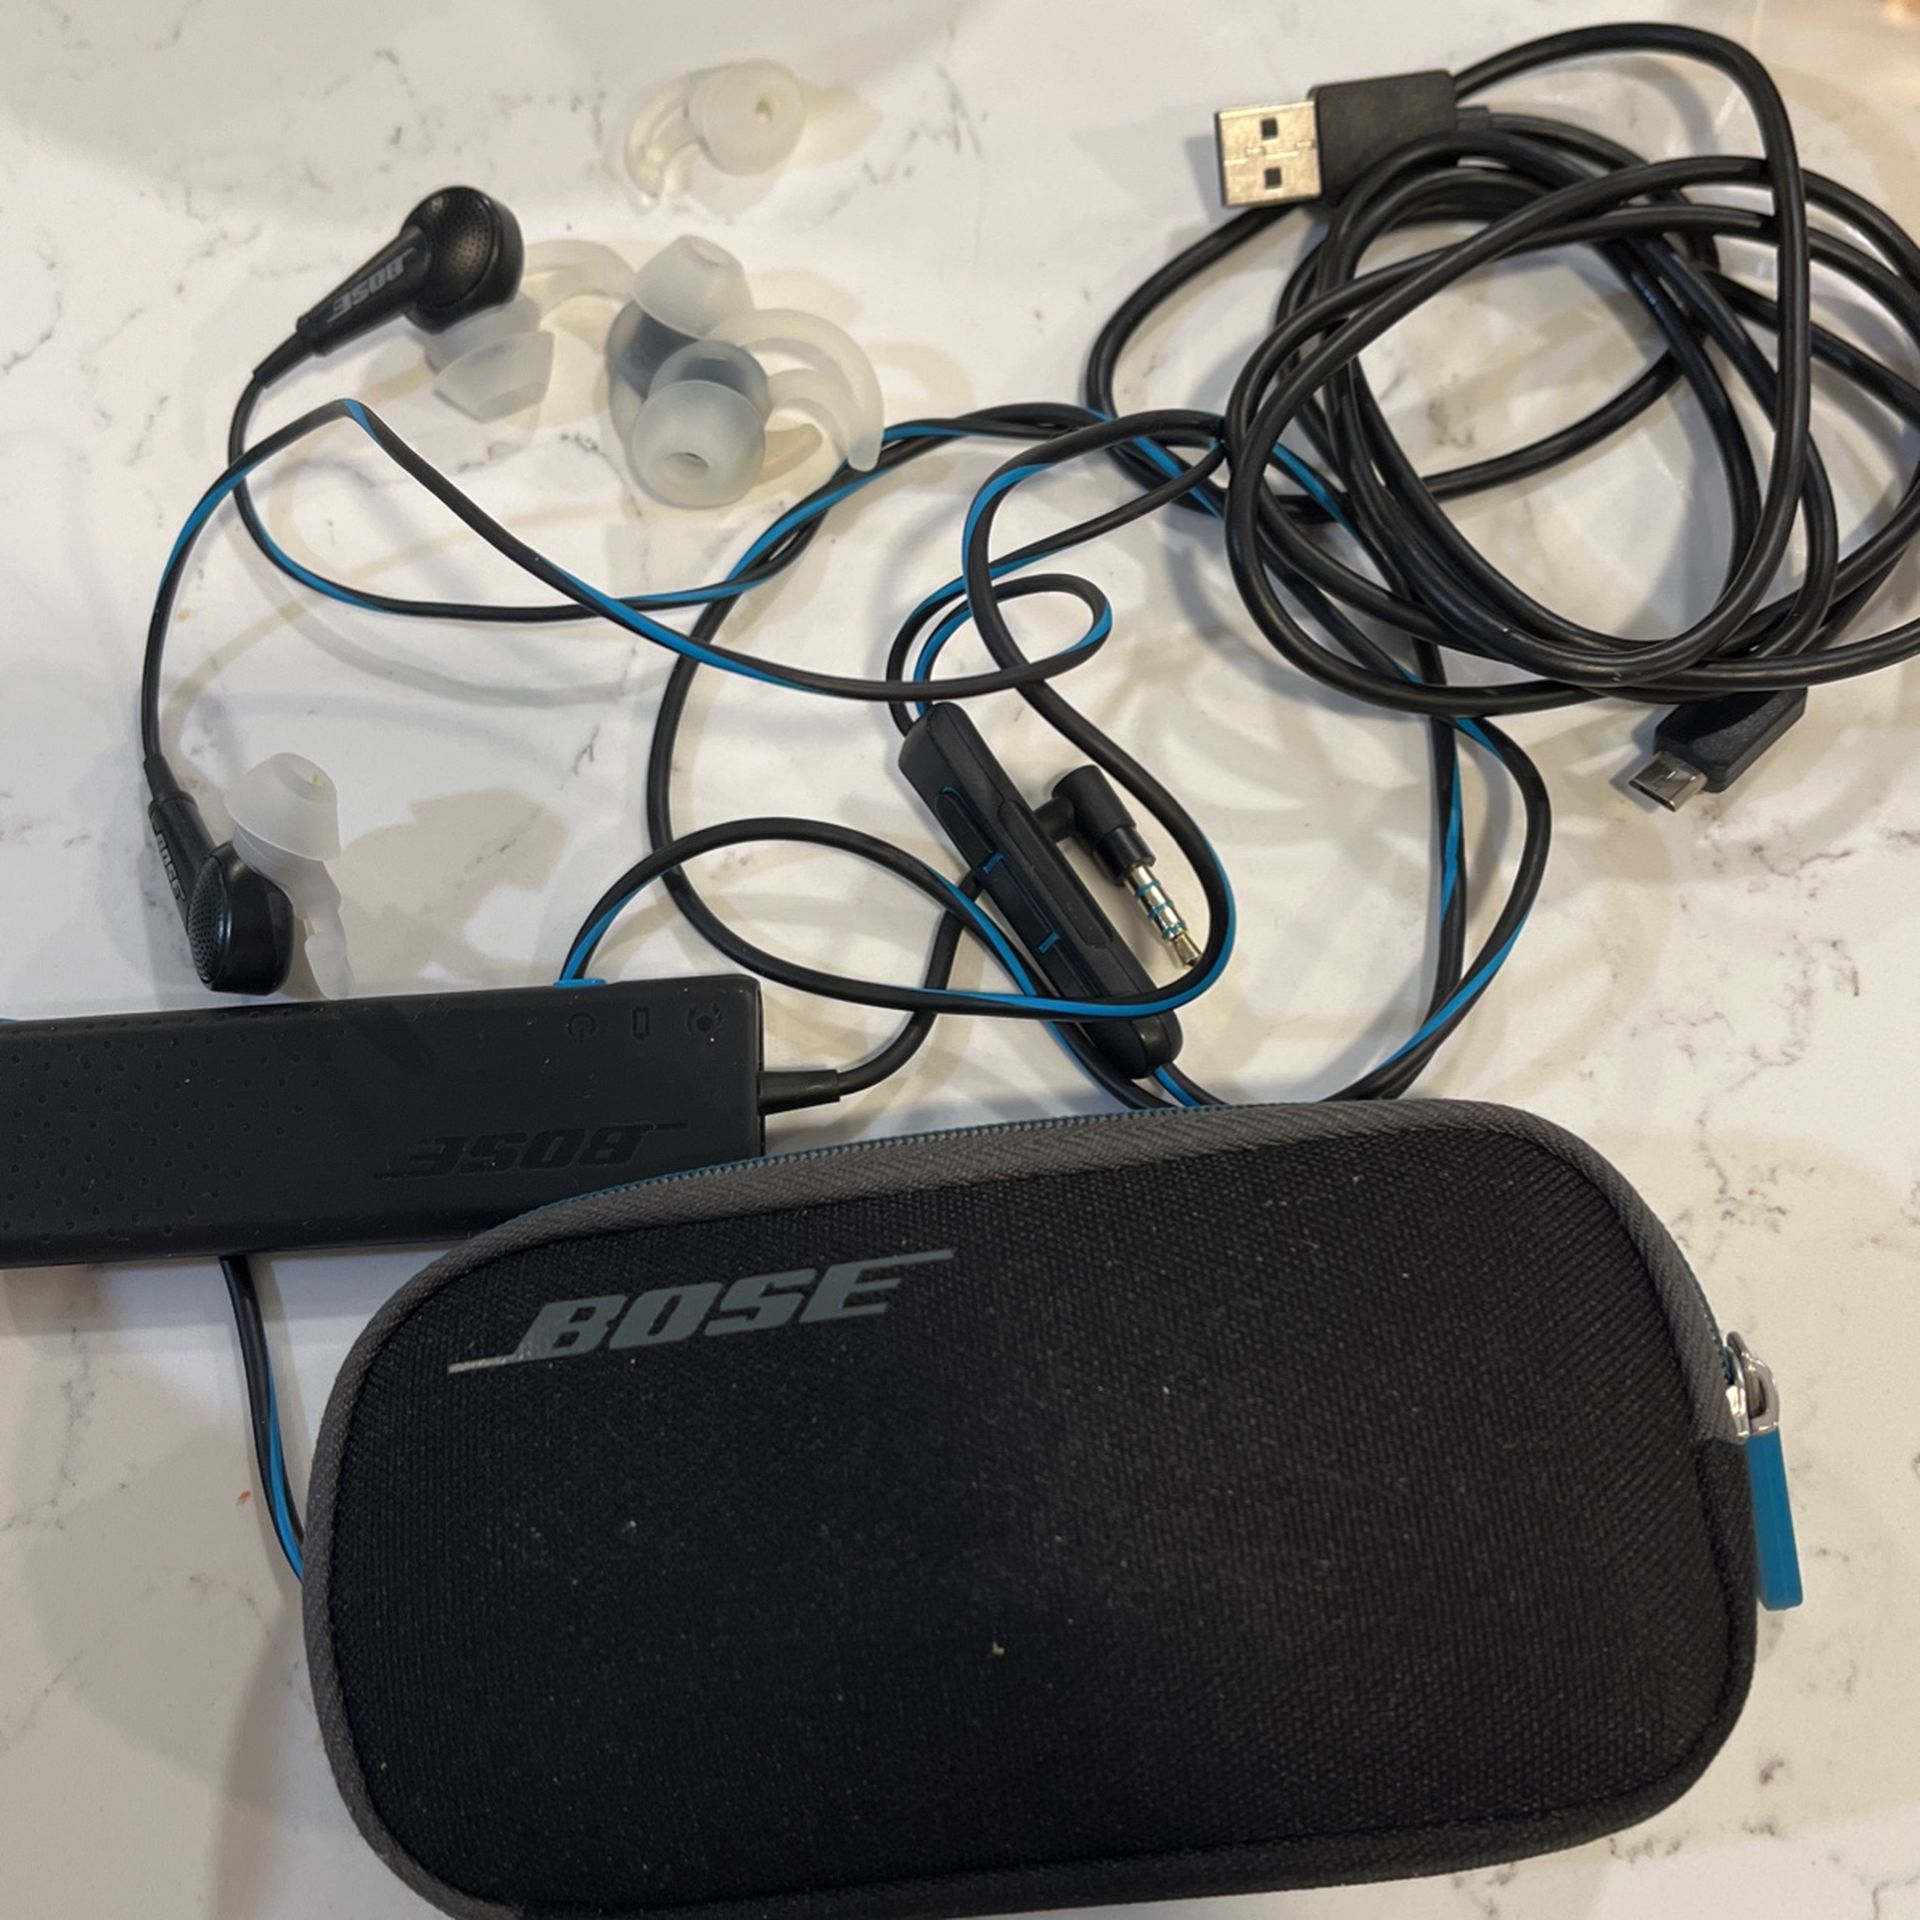 BOSE QC20 Wired Headphones QuietComfort Noise Cancelling Earbuds for Android Phones - Excellent Condition